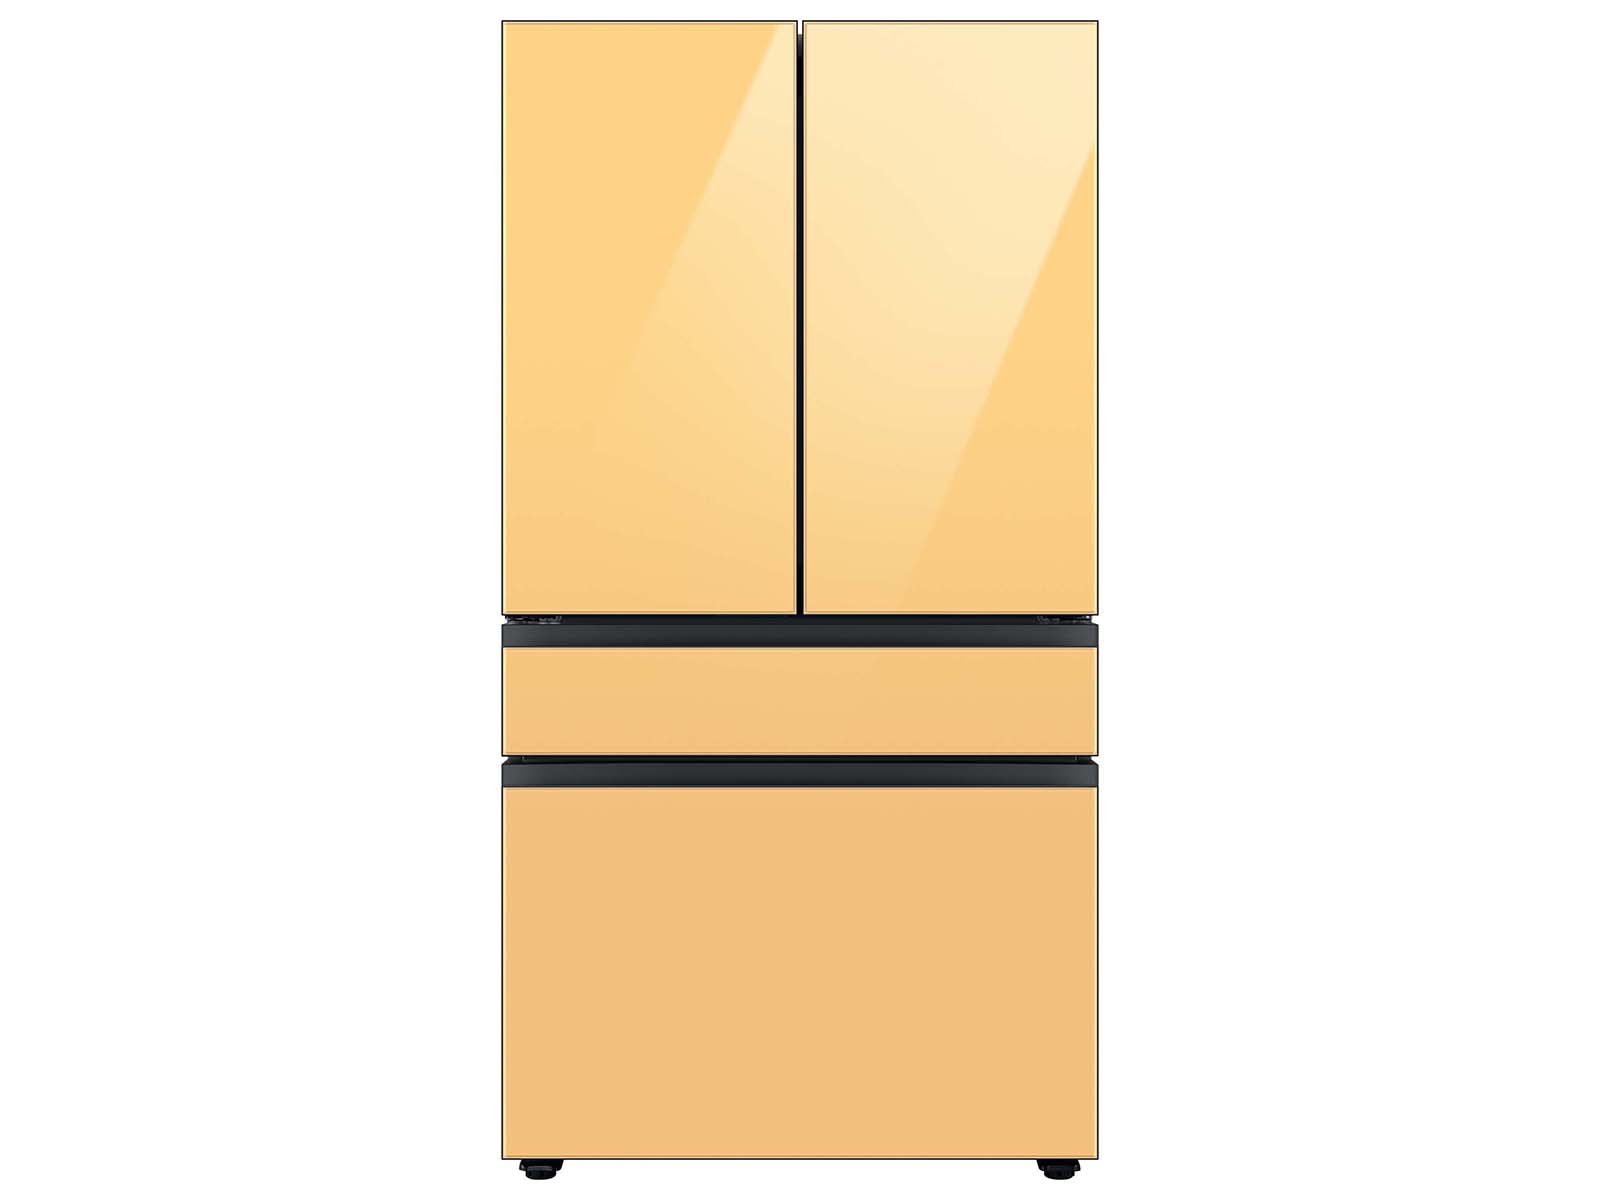 Samsung Bespoke 4-Door French Door Refrigerator in White Glass (23 cu. ft.) with AutoFill Water Pitcher and Customizable Door Panel Colors in Sunrise Yellow Glass